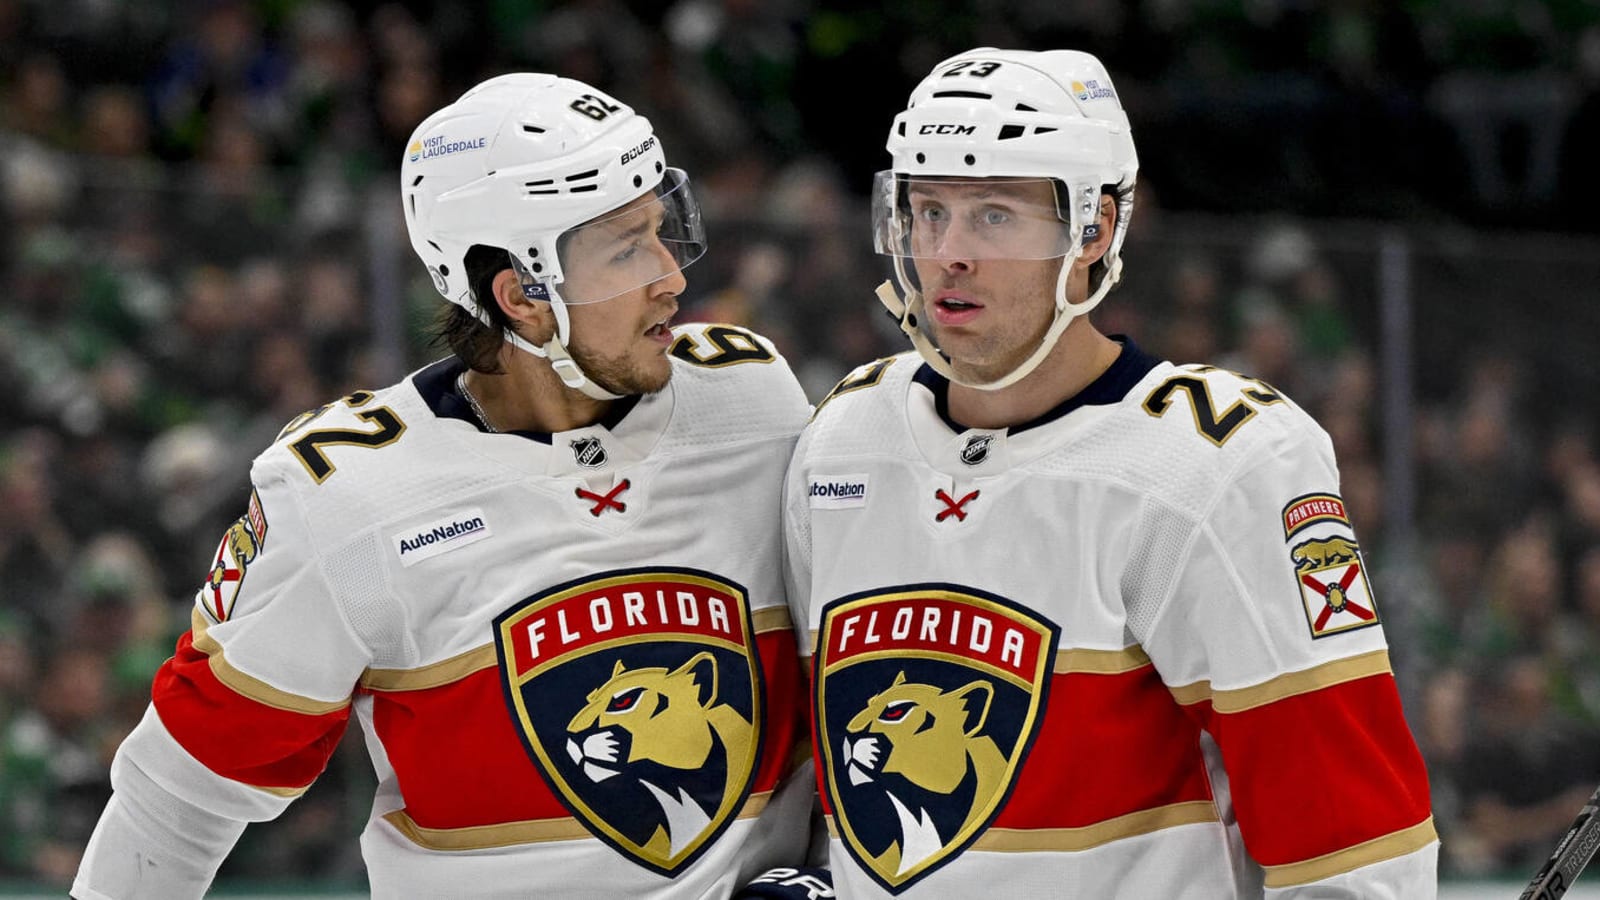 Panthers storm back from 3-0 deficit in possible finals preview